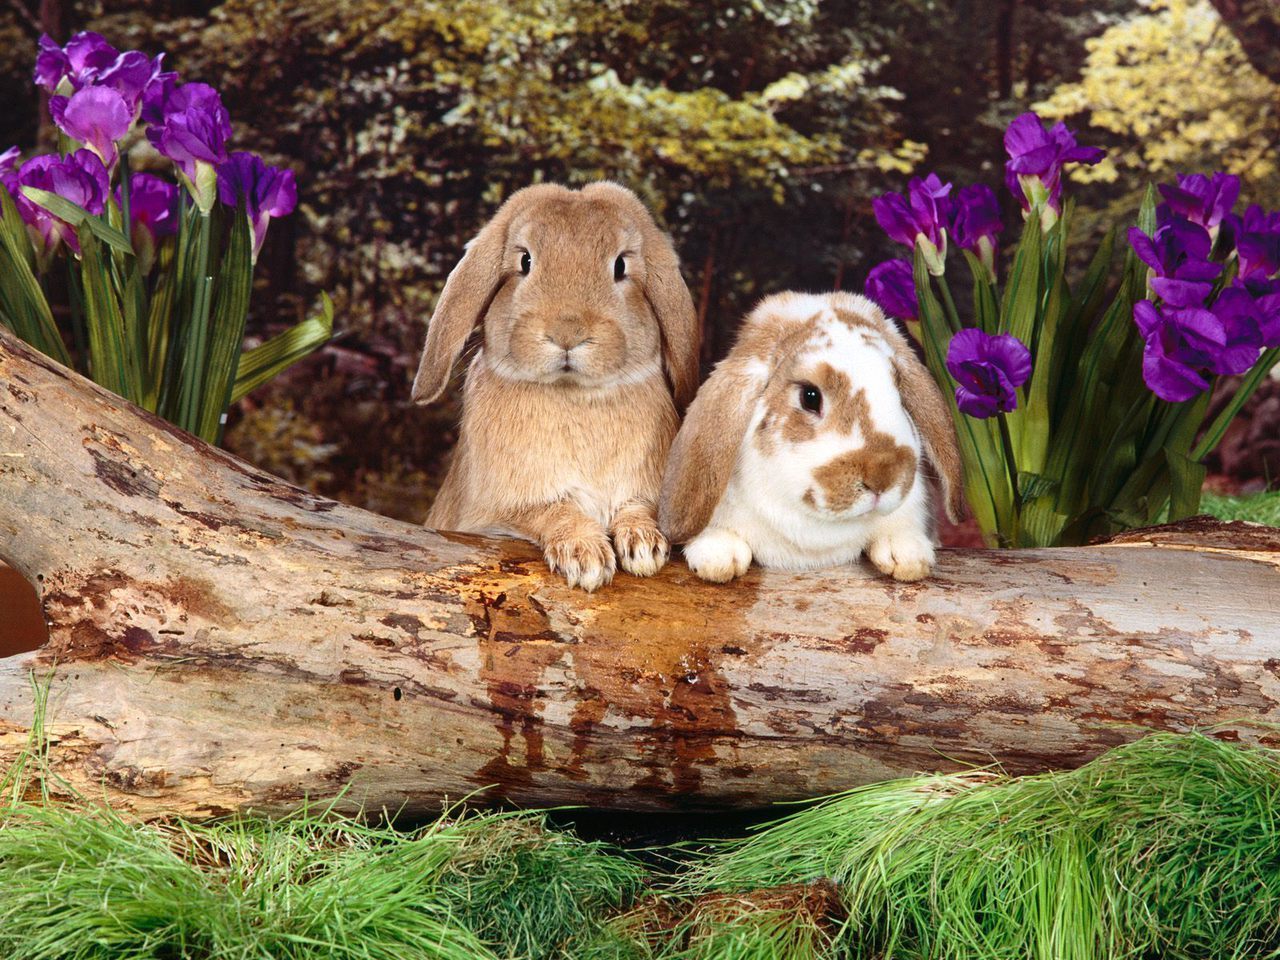 A Little Bunny Wunny Flora And Fauna Wallpaper